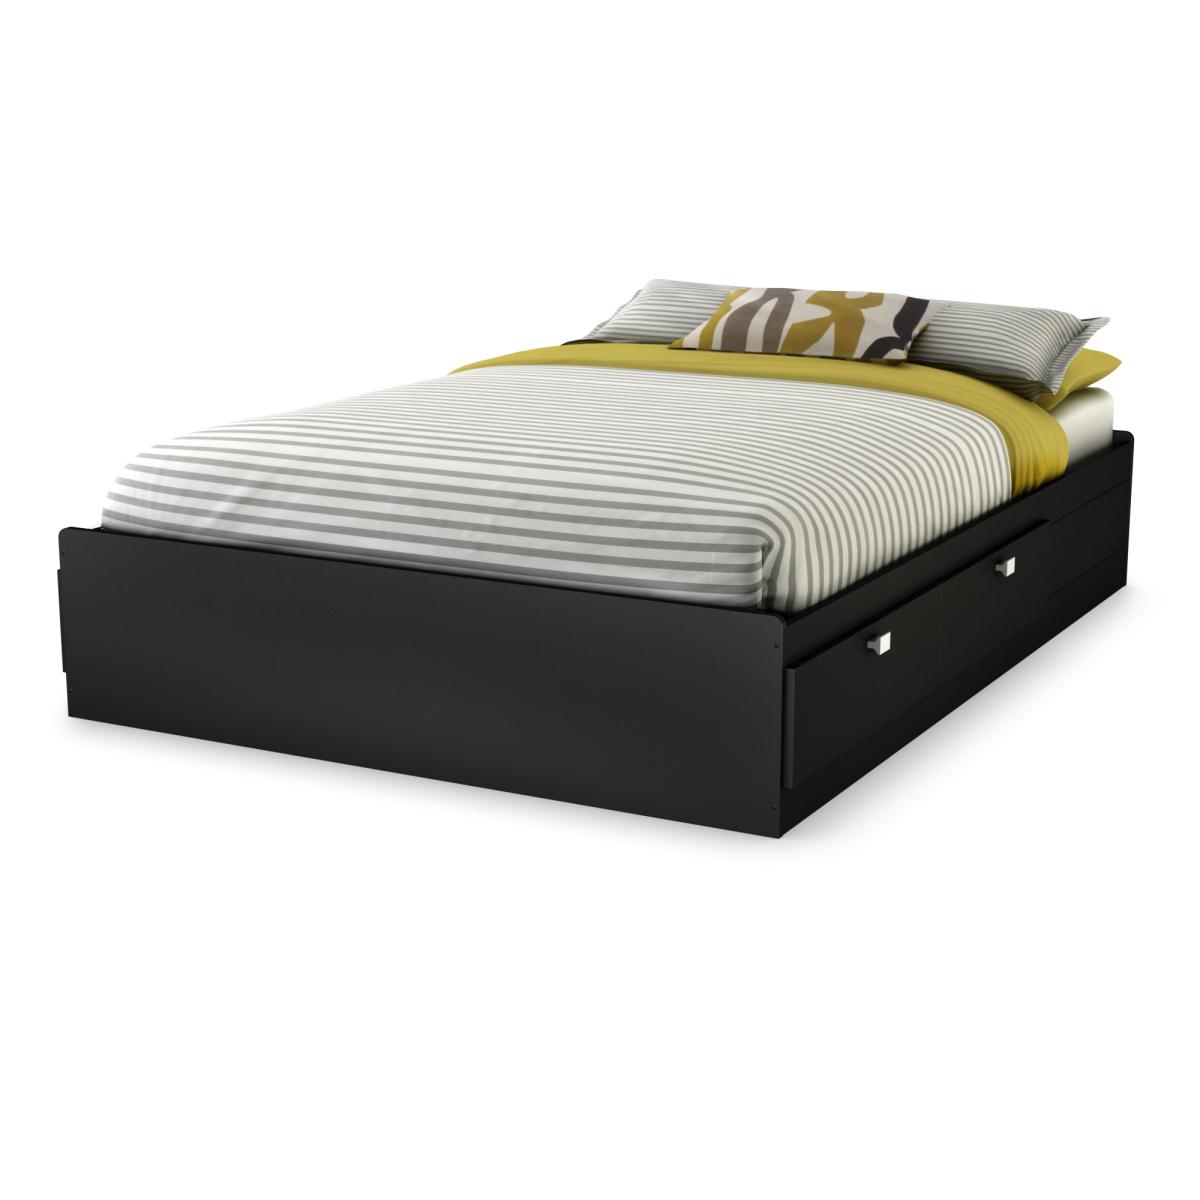 South Shore Spark Full Mates Bed - Pure Black